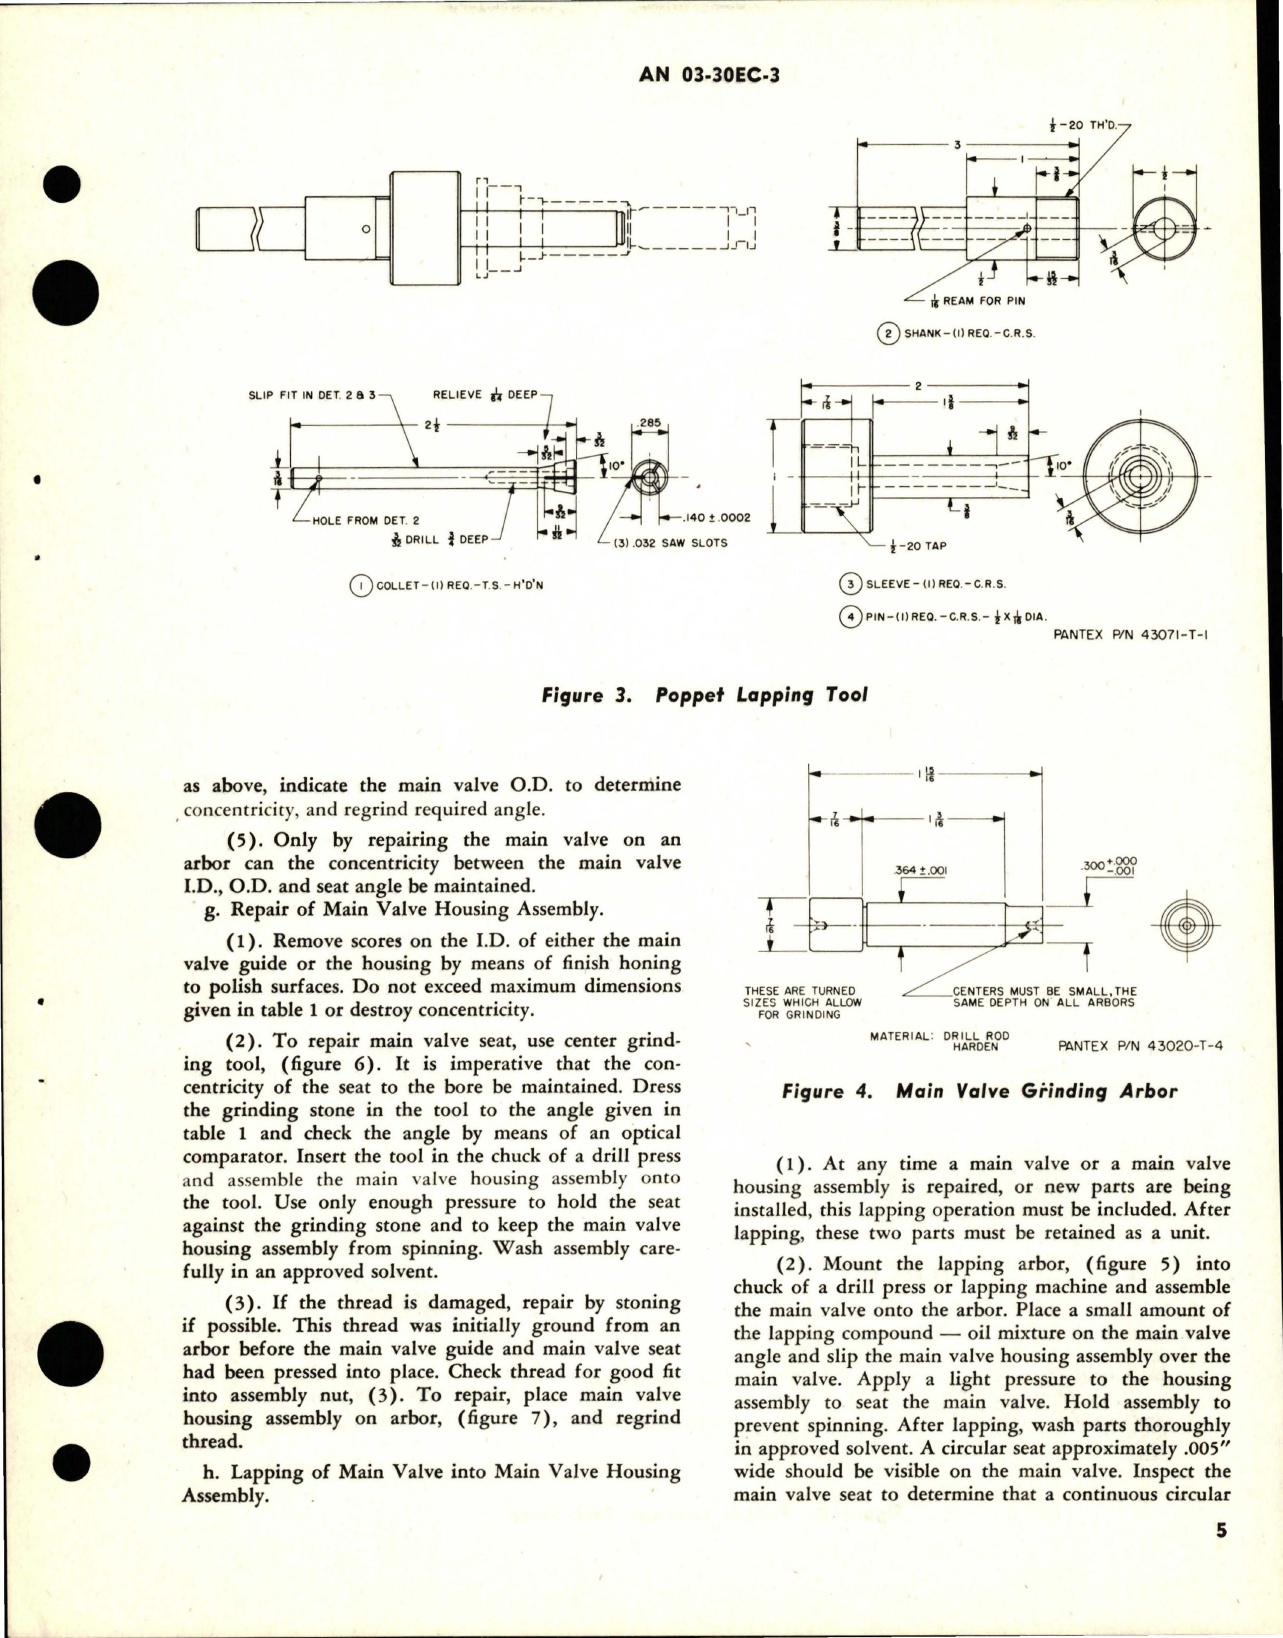 Sample page 5 from AirCorps Library document: Overhaul Instructions with Parts Breakdown for Hydraulic Pressure Relief Valve - HPLV-A0